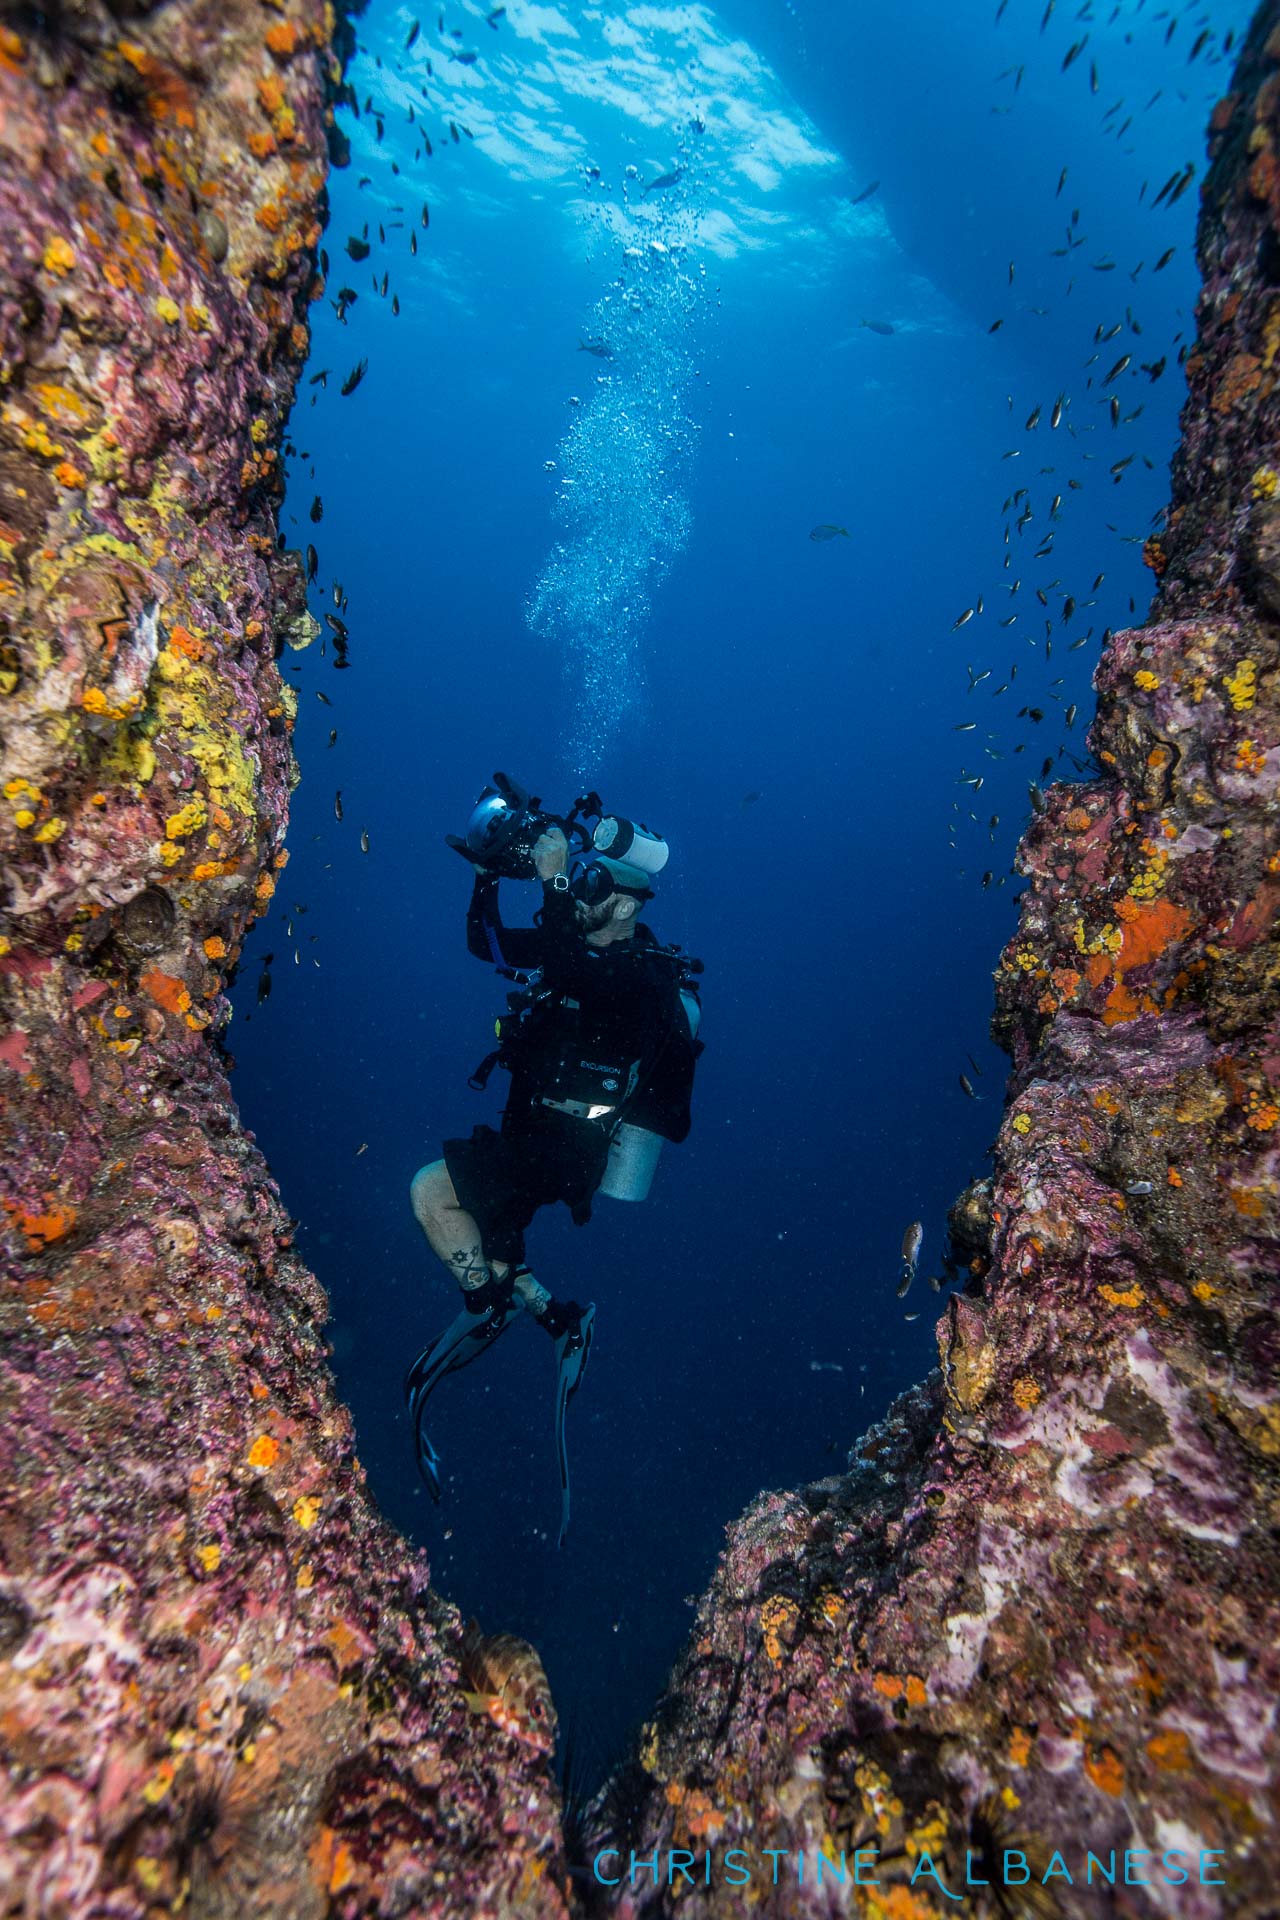 I had loads of fun teaching Jess and John what I know about underwater photography! Here's a photo I took of John while I was inside the chimney at Sailrock. Great students, miss you guys! 😊 @jesathey 

#creativeframing #naturalframe #underwater #underwaterdiving #underwaterphotography #uwphotography #photocourse #ocean #sailrock #thailand #kohtao #adventure #ikelite #ds160 #canonshooters #canon6d #canon1740 #wideangle #scuba #scubadiving #divinglife #padi